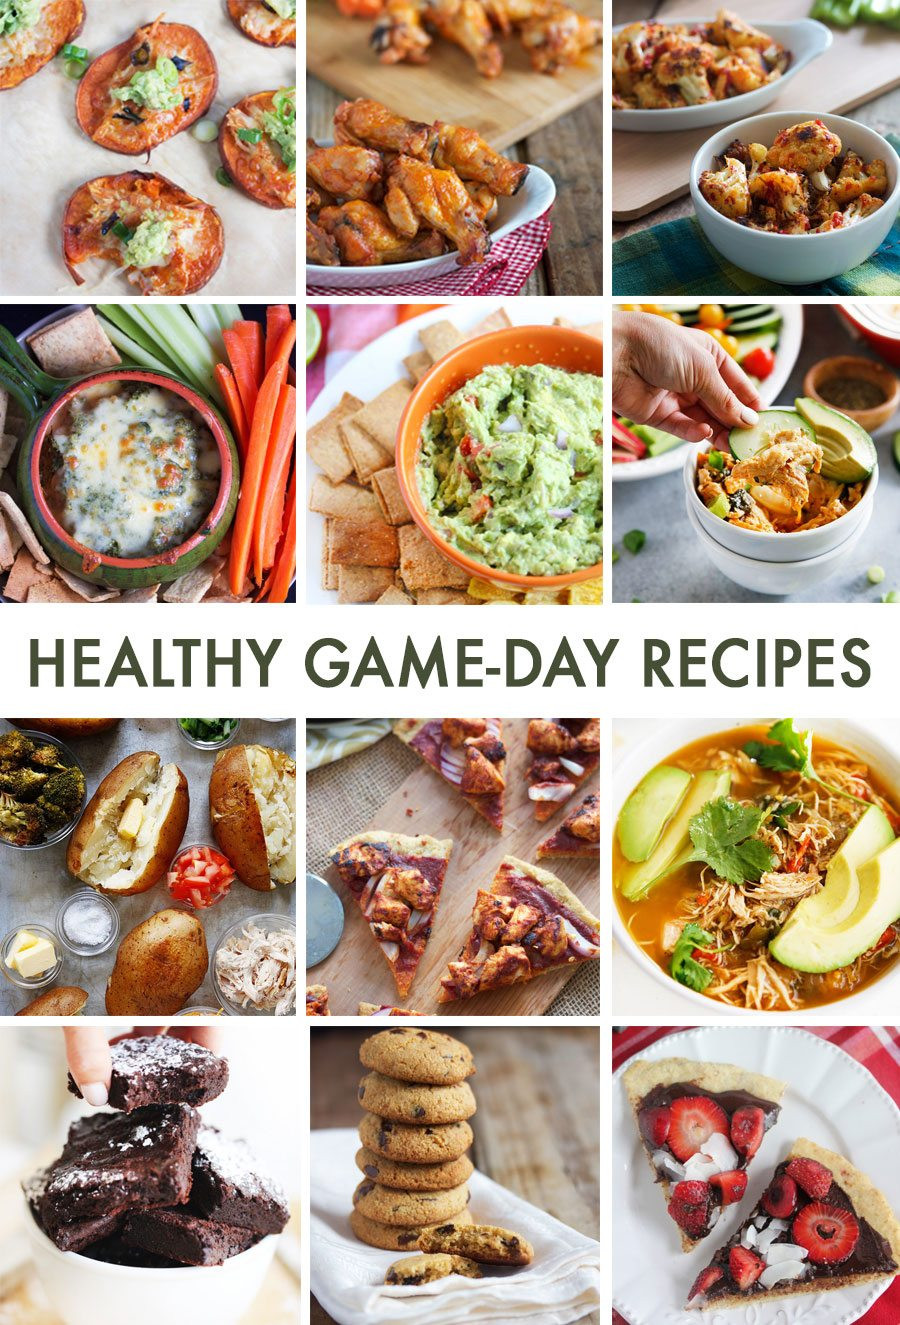 Healthy Snacks For Football Games
 Healthy Game Day Recipes Perfect For Football Entertaining